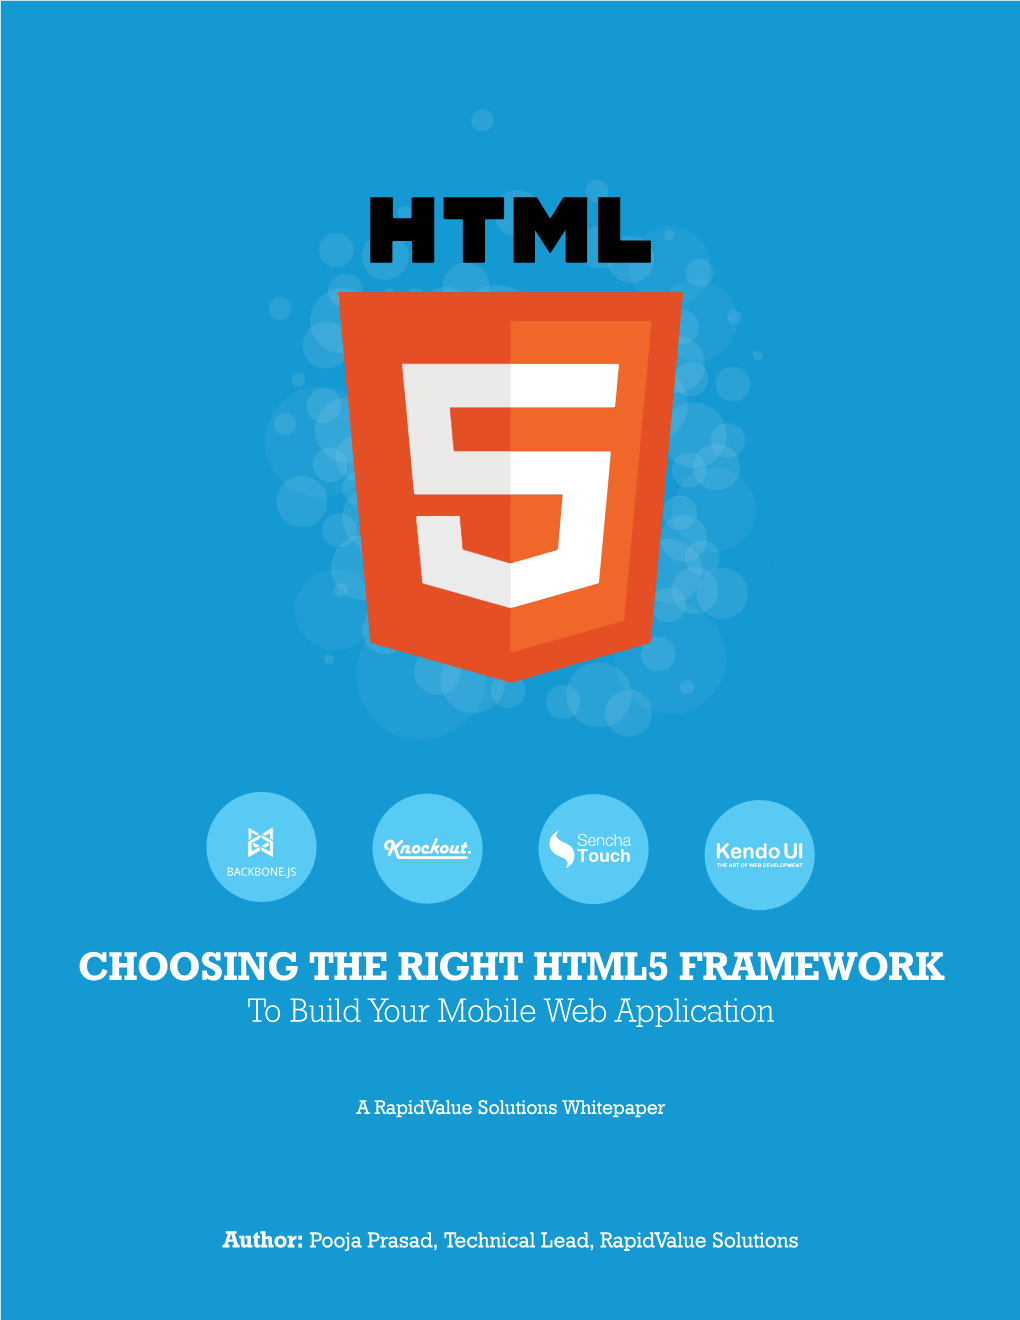 CHOOSING the RIGHT HTML5 FRAMEWORK to Build Your Mobile Web Application